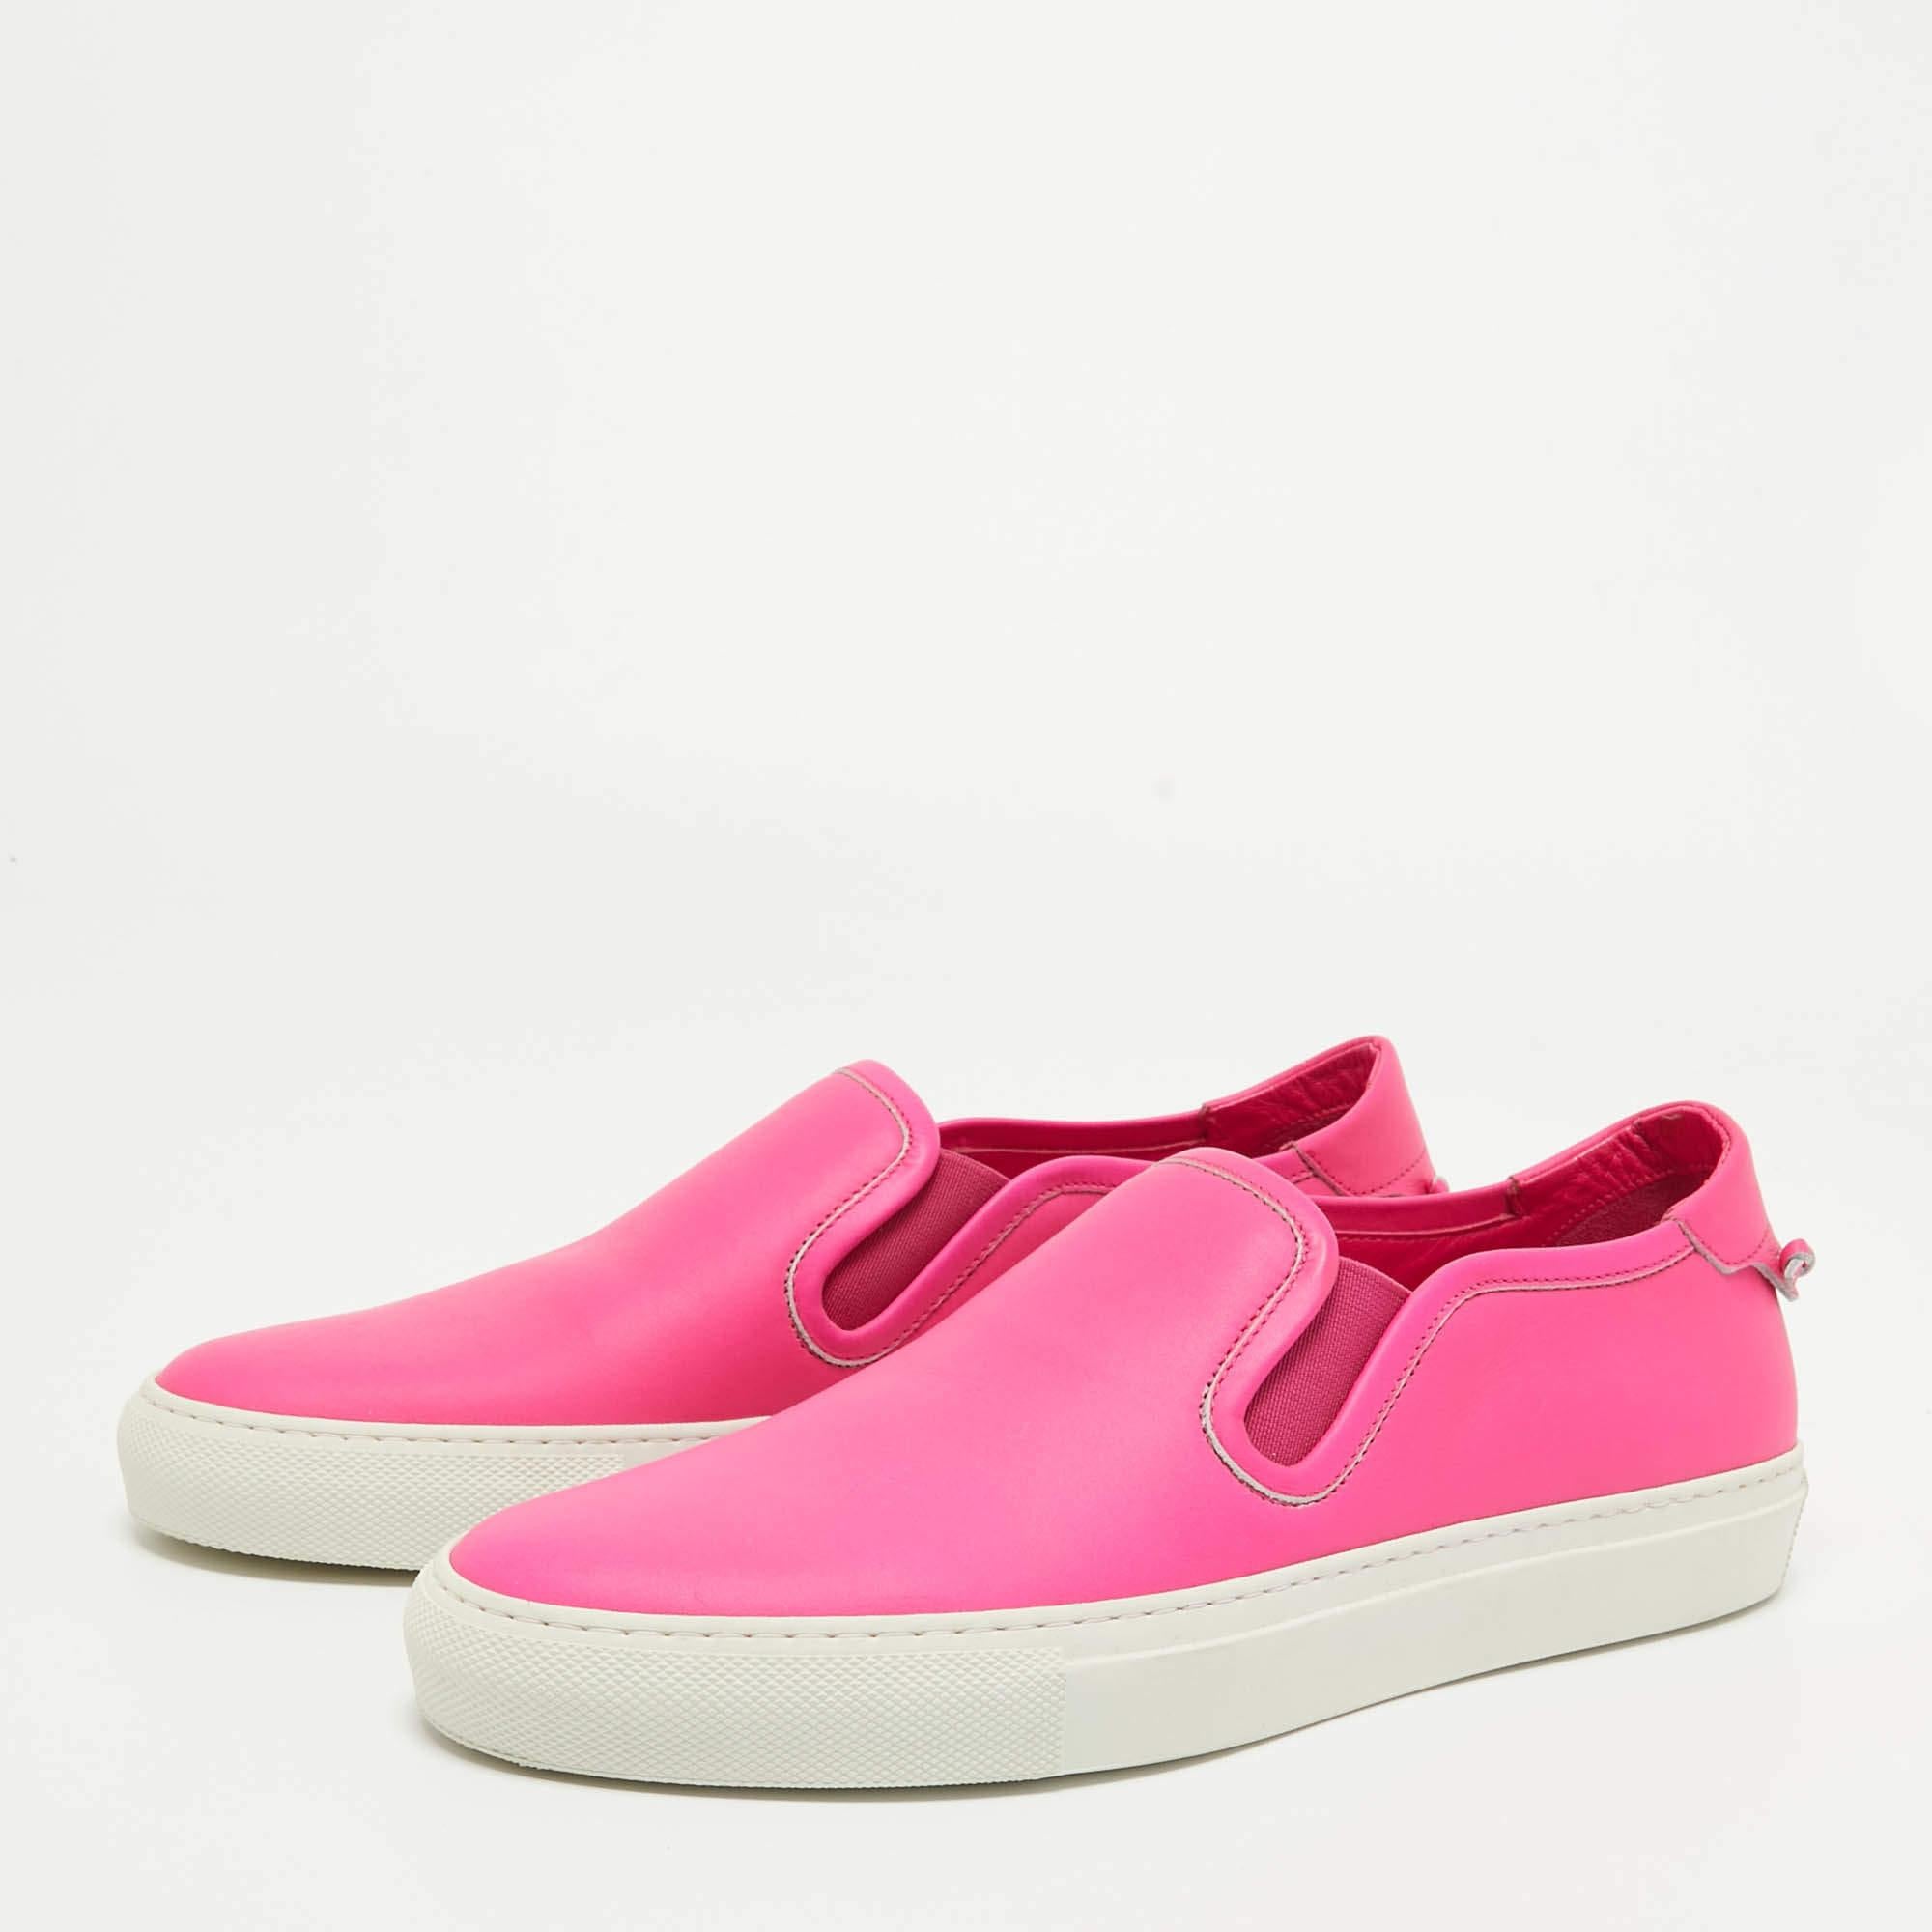 Givenchy Pink Leather Slip On Sneakers Size 40 For Sale 1